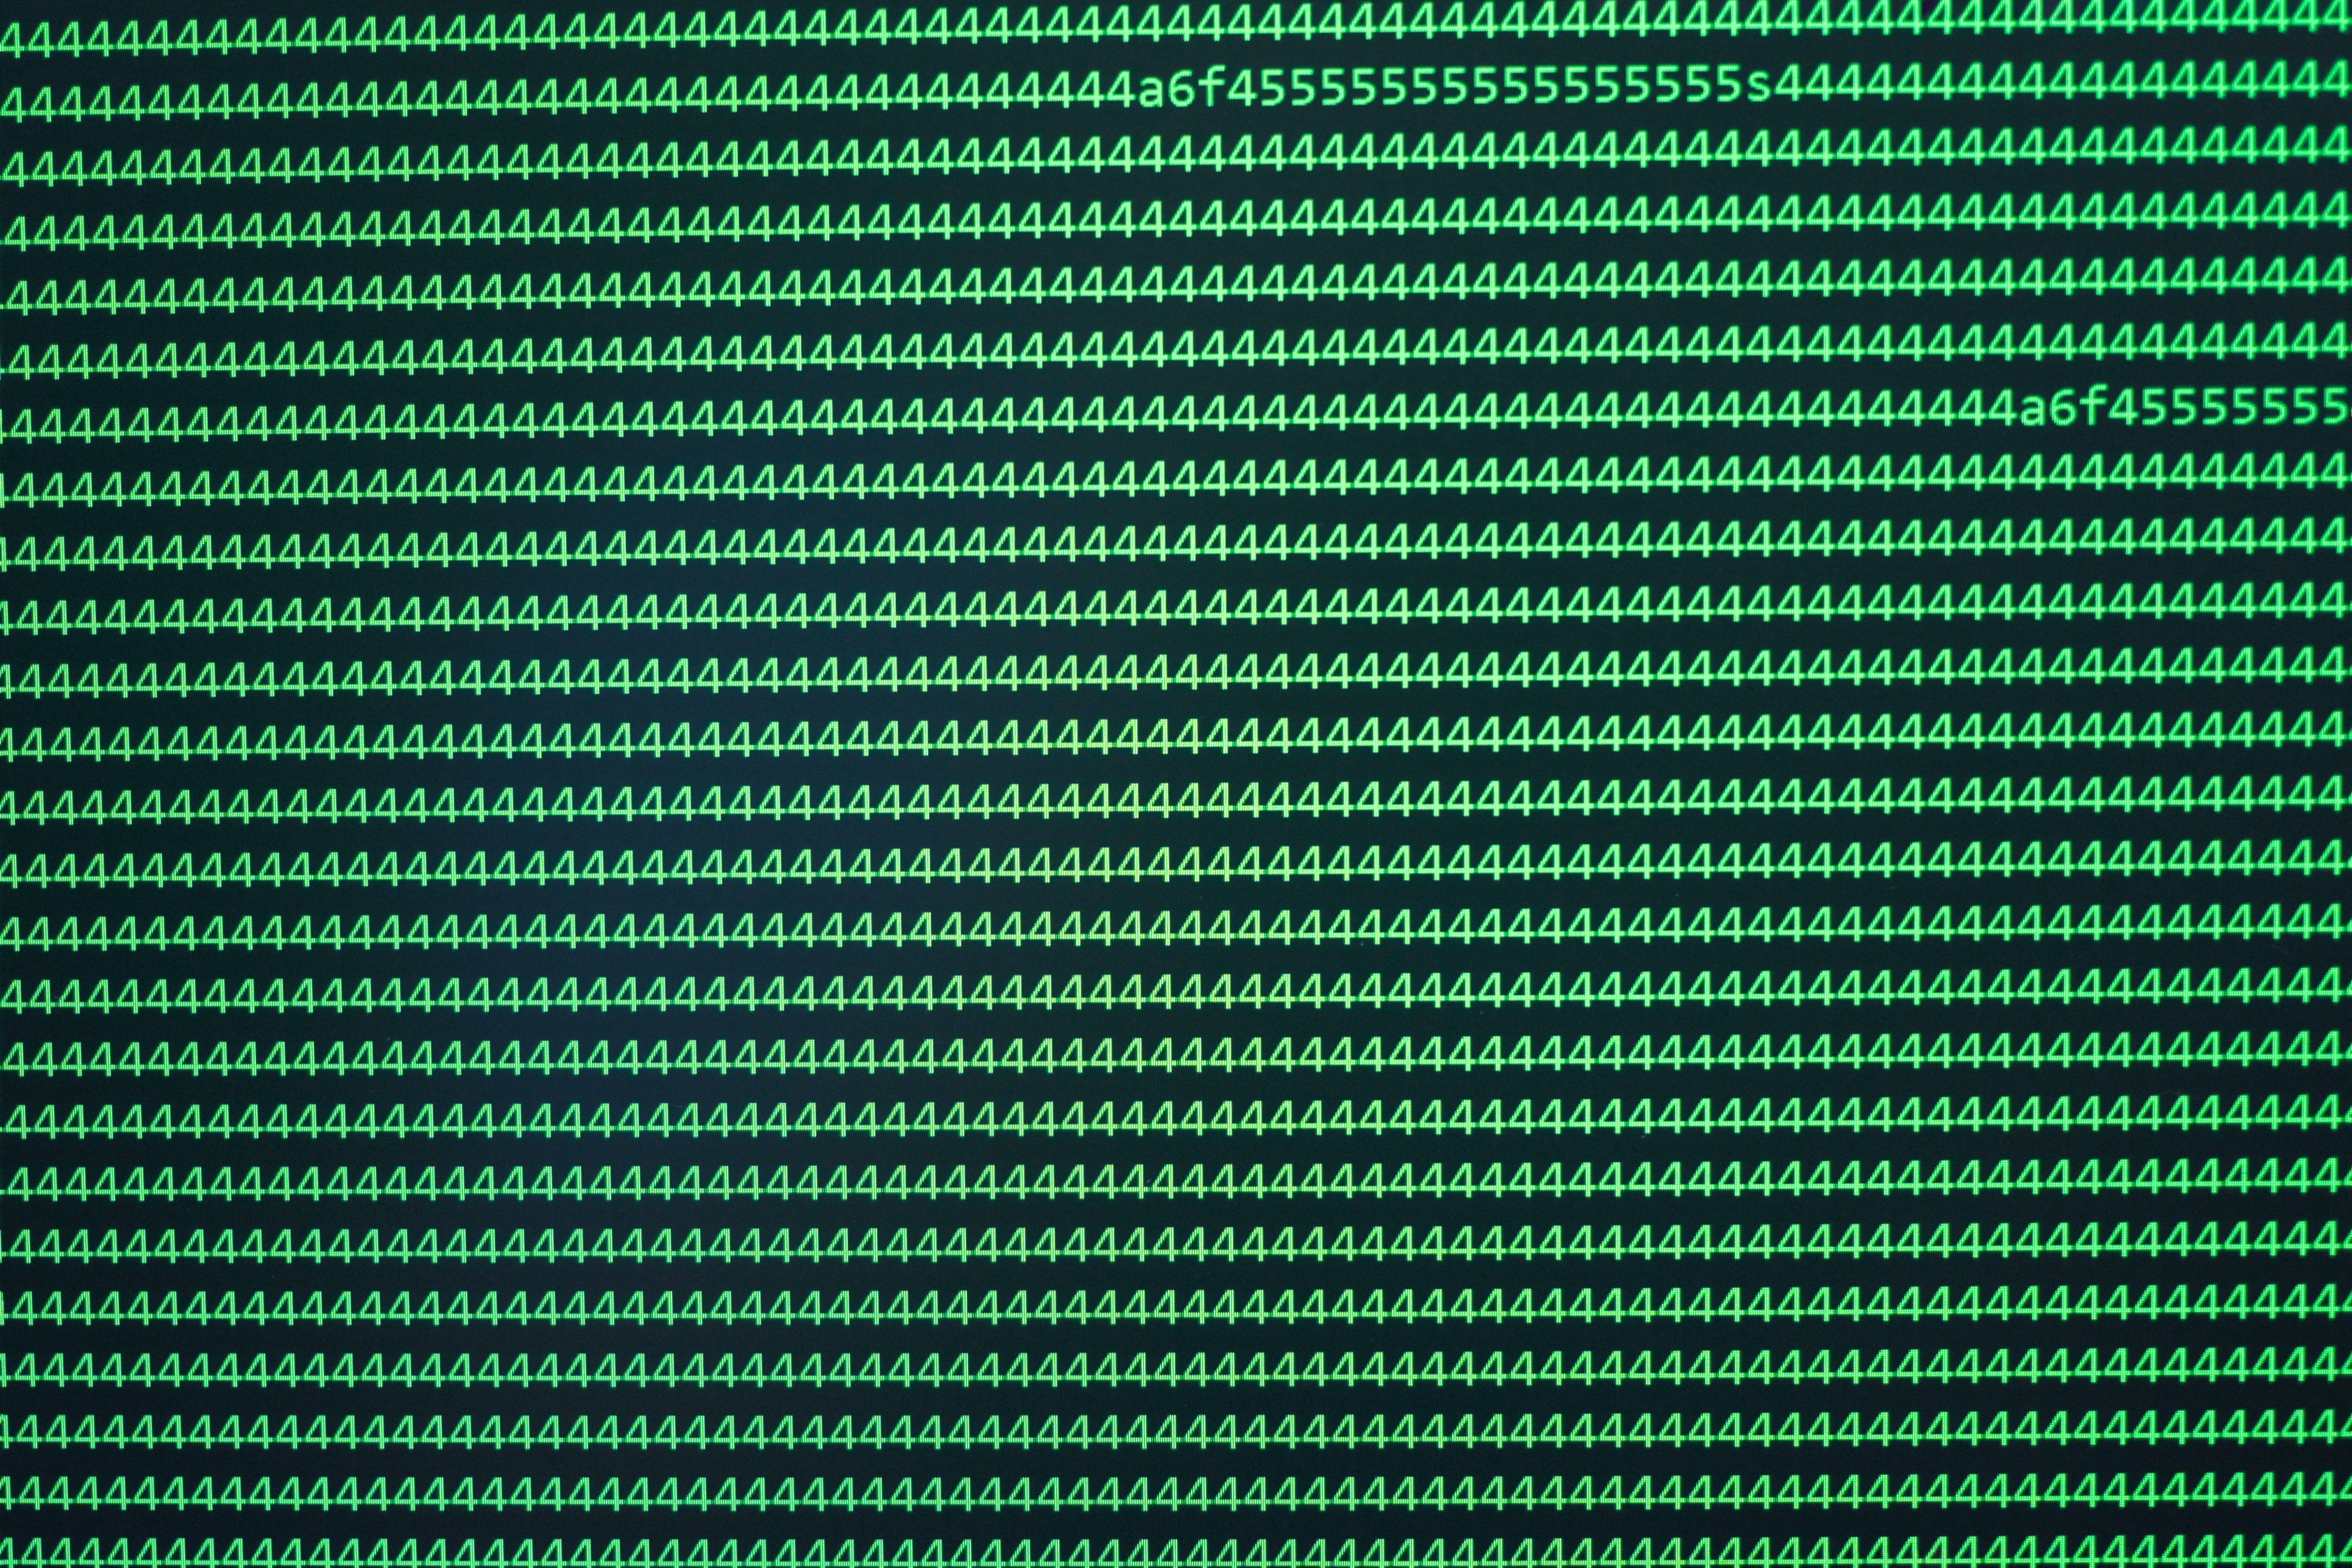 matrix, green, code, miscellanea, miscellaneous, line, numbers, strings cell phone wallpapers